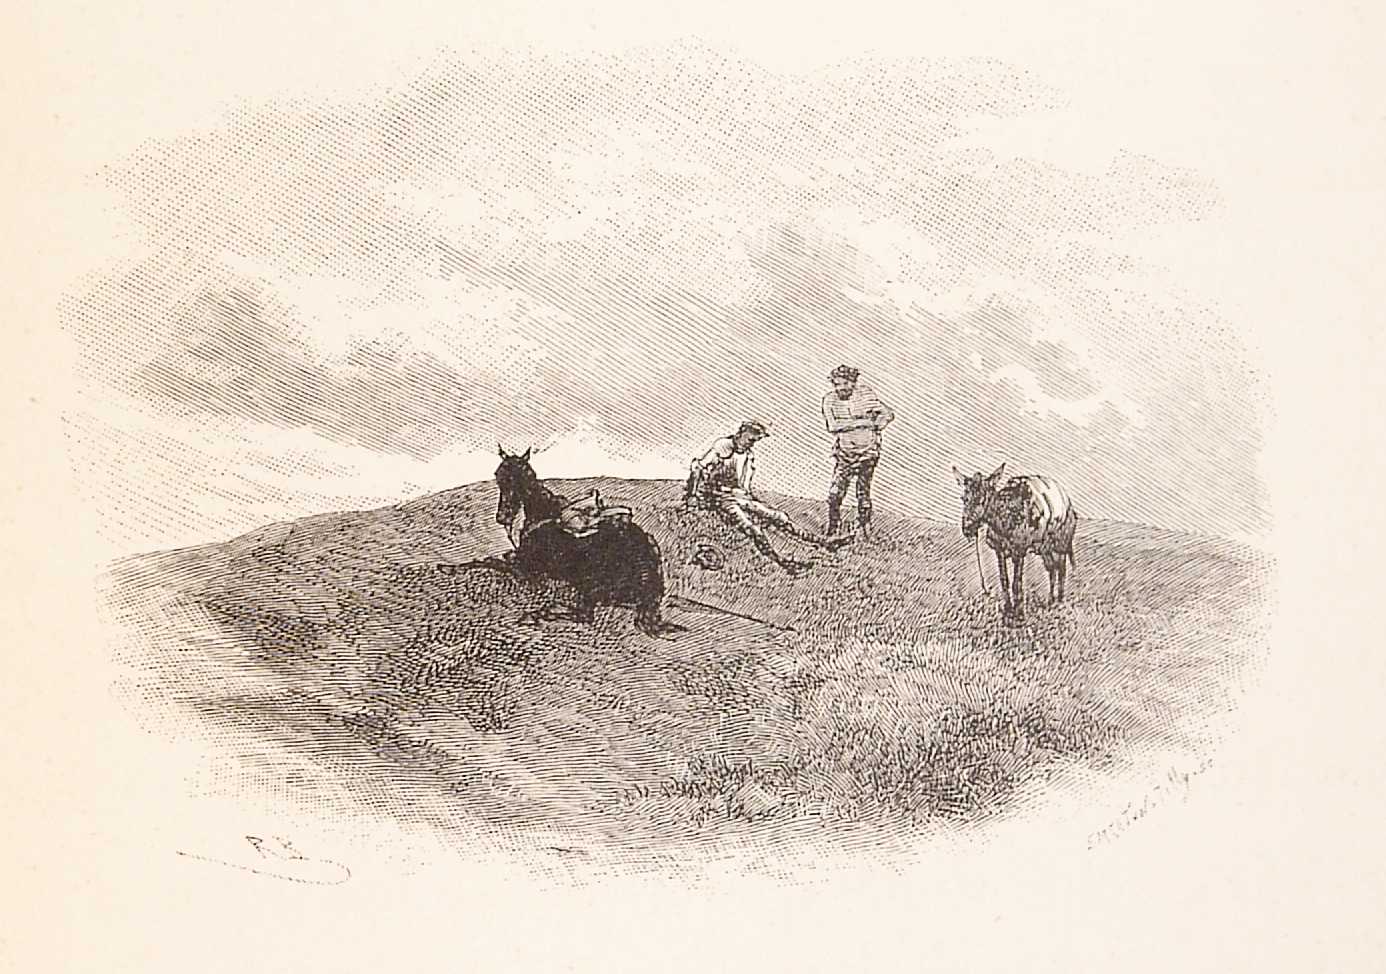 two men are standing on horses and working